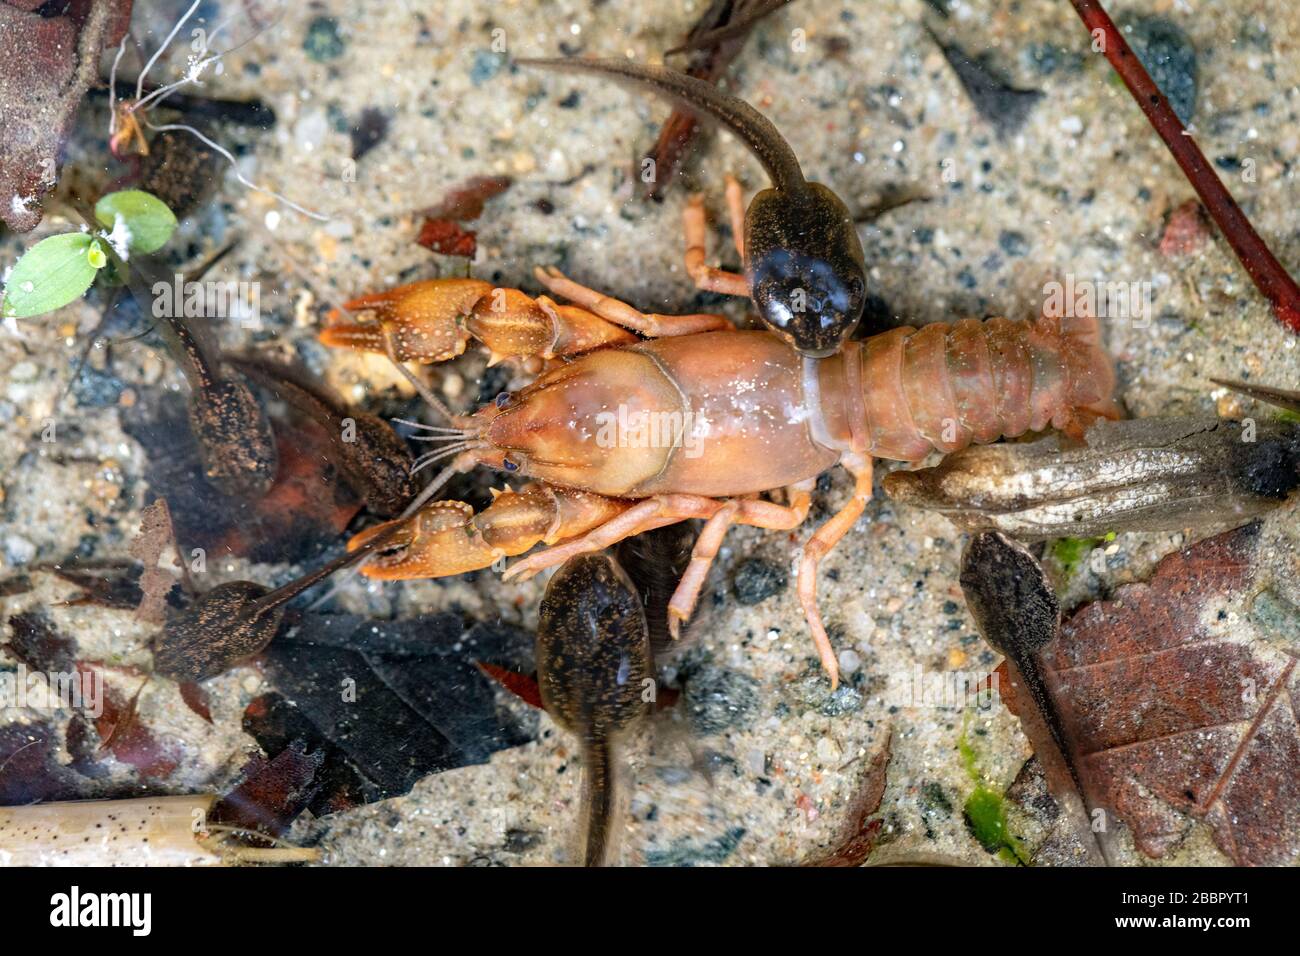 Tadpoles feeding on a dead crayfish in shallow pool of water - Pisgah National Forest, Brevard, North Carolina, USA Stock Photo